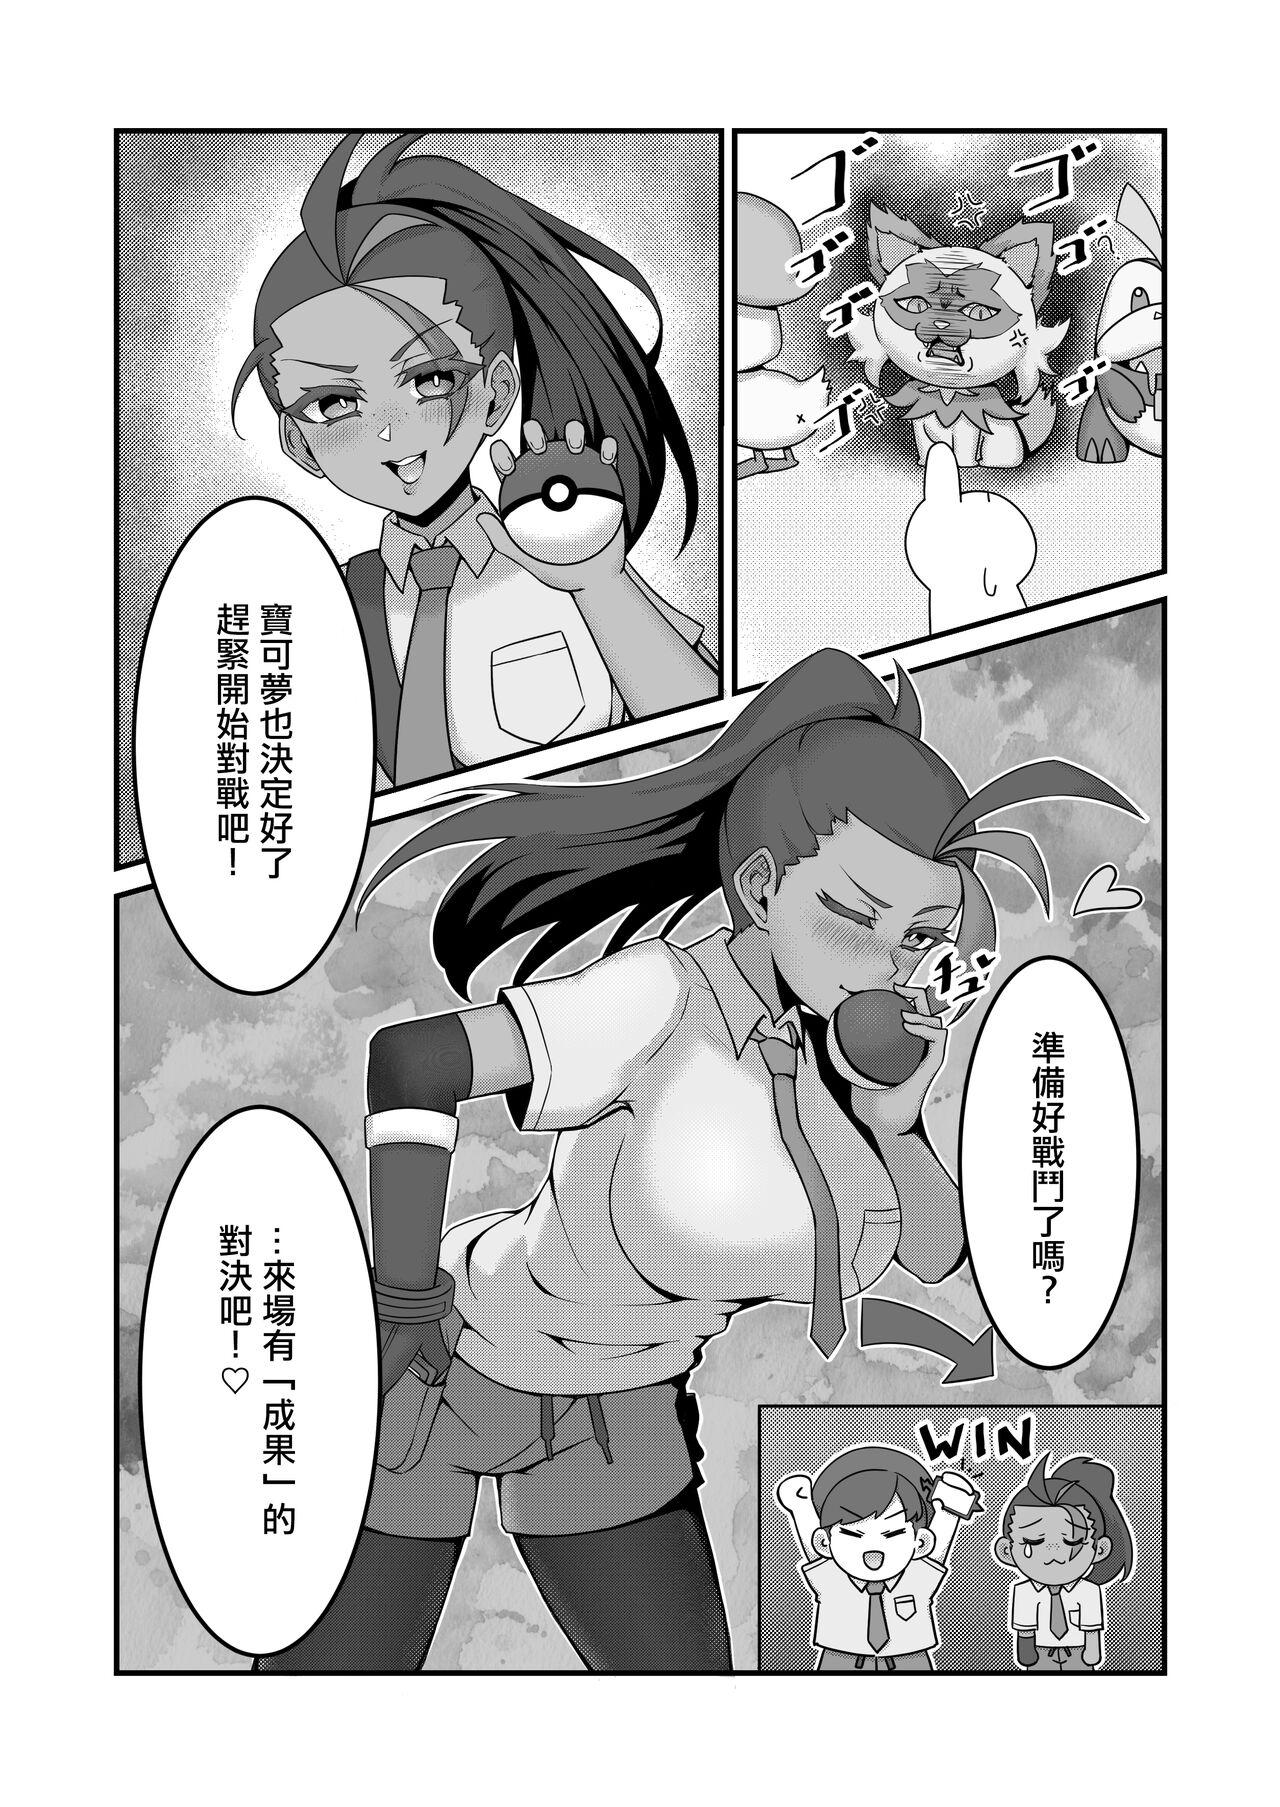 Female Domination [KuQ] Sex after Versus - Katy Hen 1 | Sex after Versus - 阿楓① [Chinese] - Pokemon | pocket monsters Amature Sex Tapes - Page 4